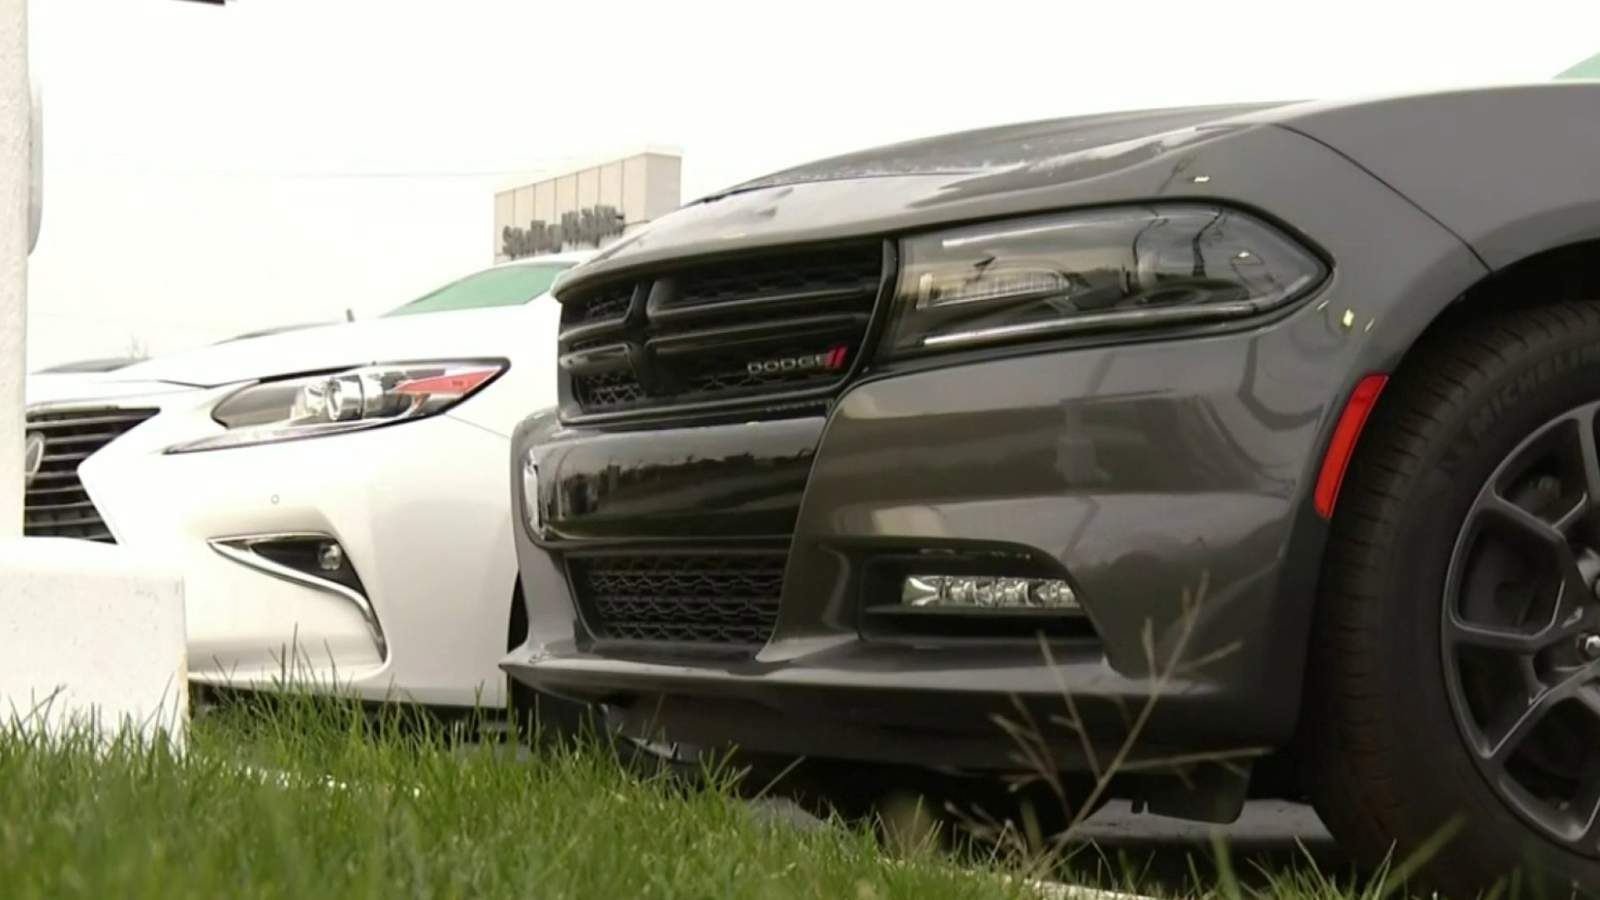 If you own a Dodge Charger or Challenger you’ll want to take steps to protect it from thieves, Sterling Heights police say